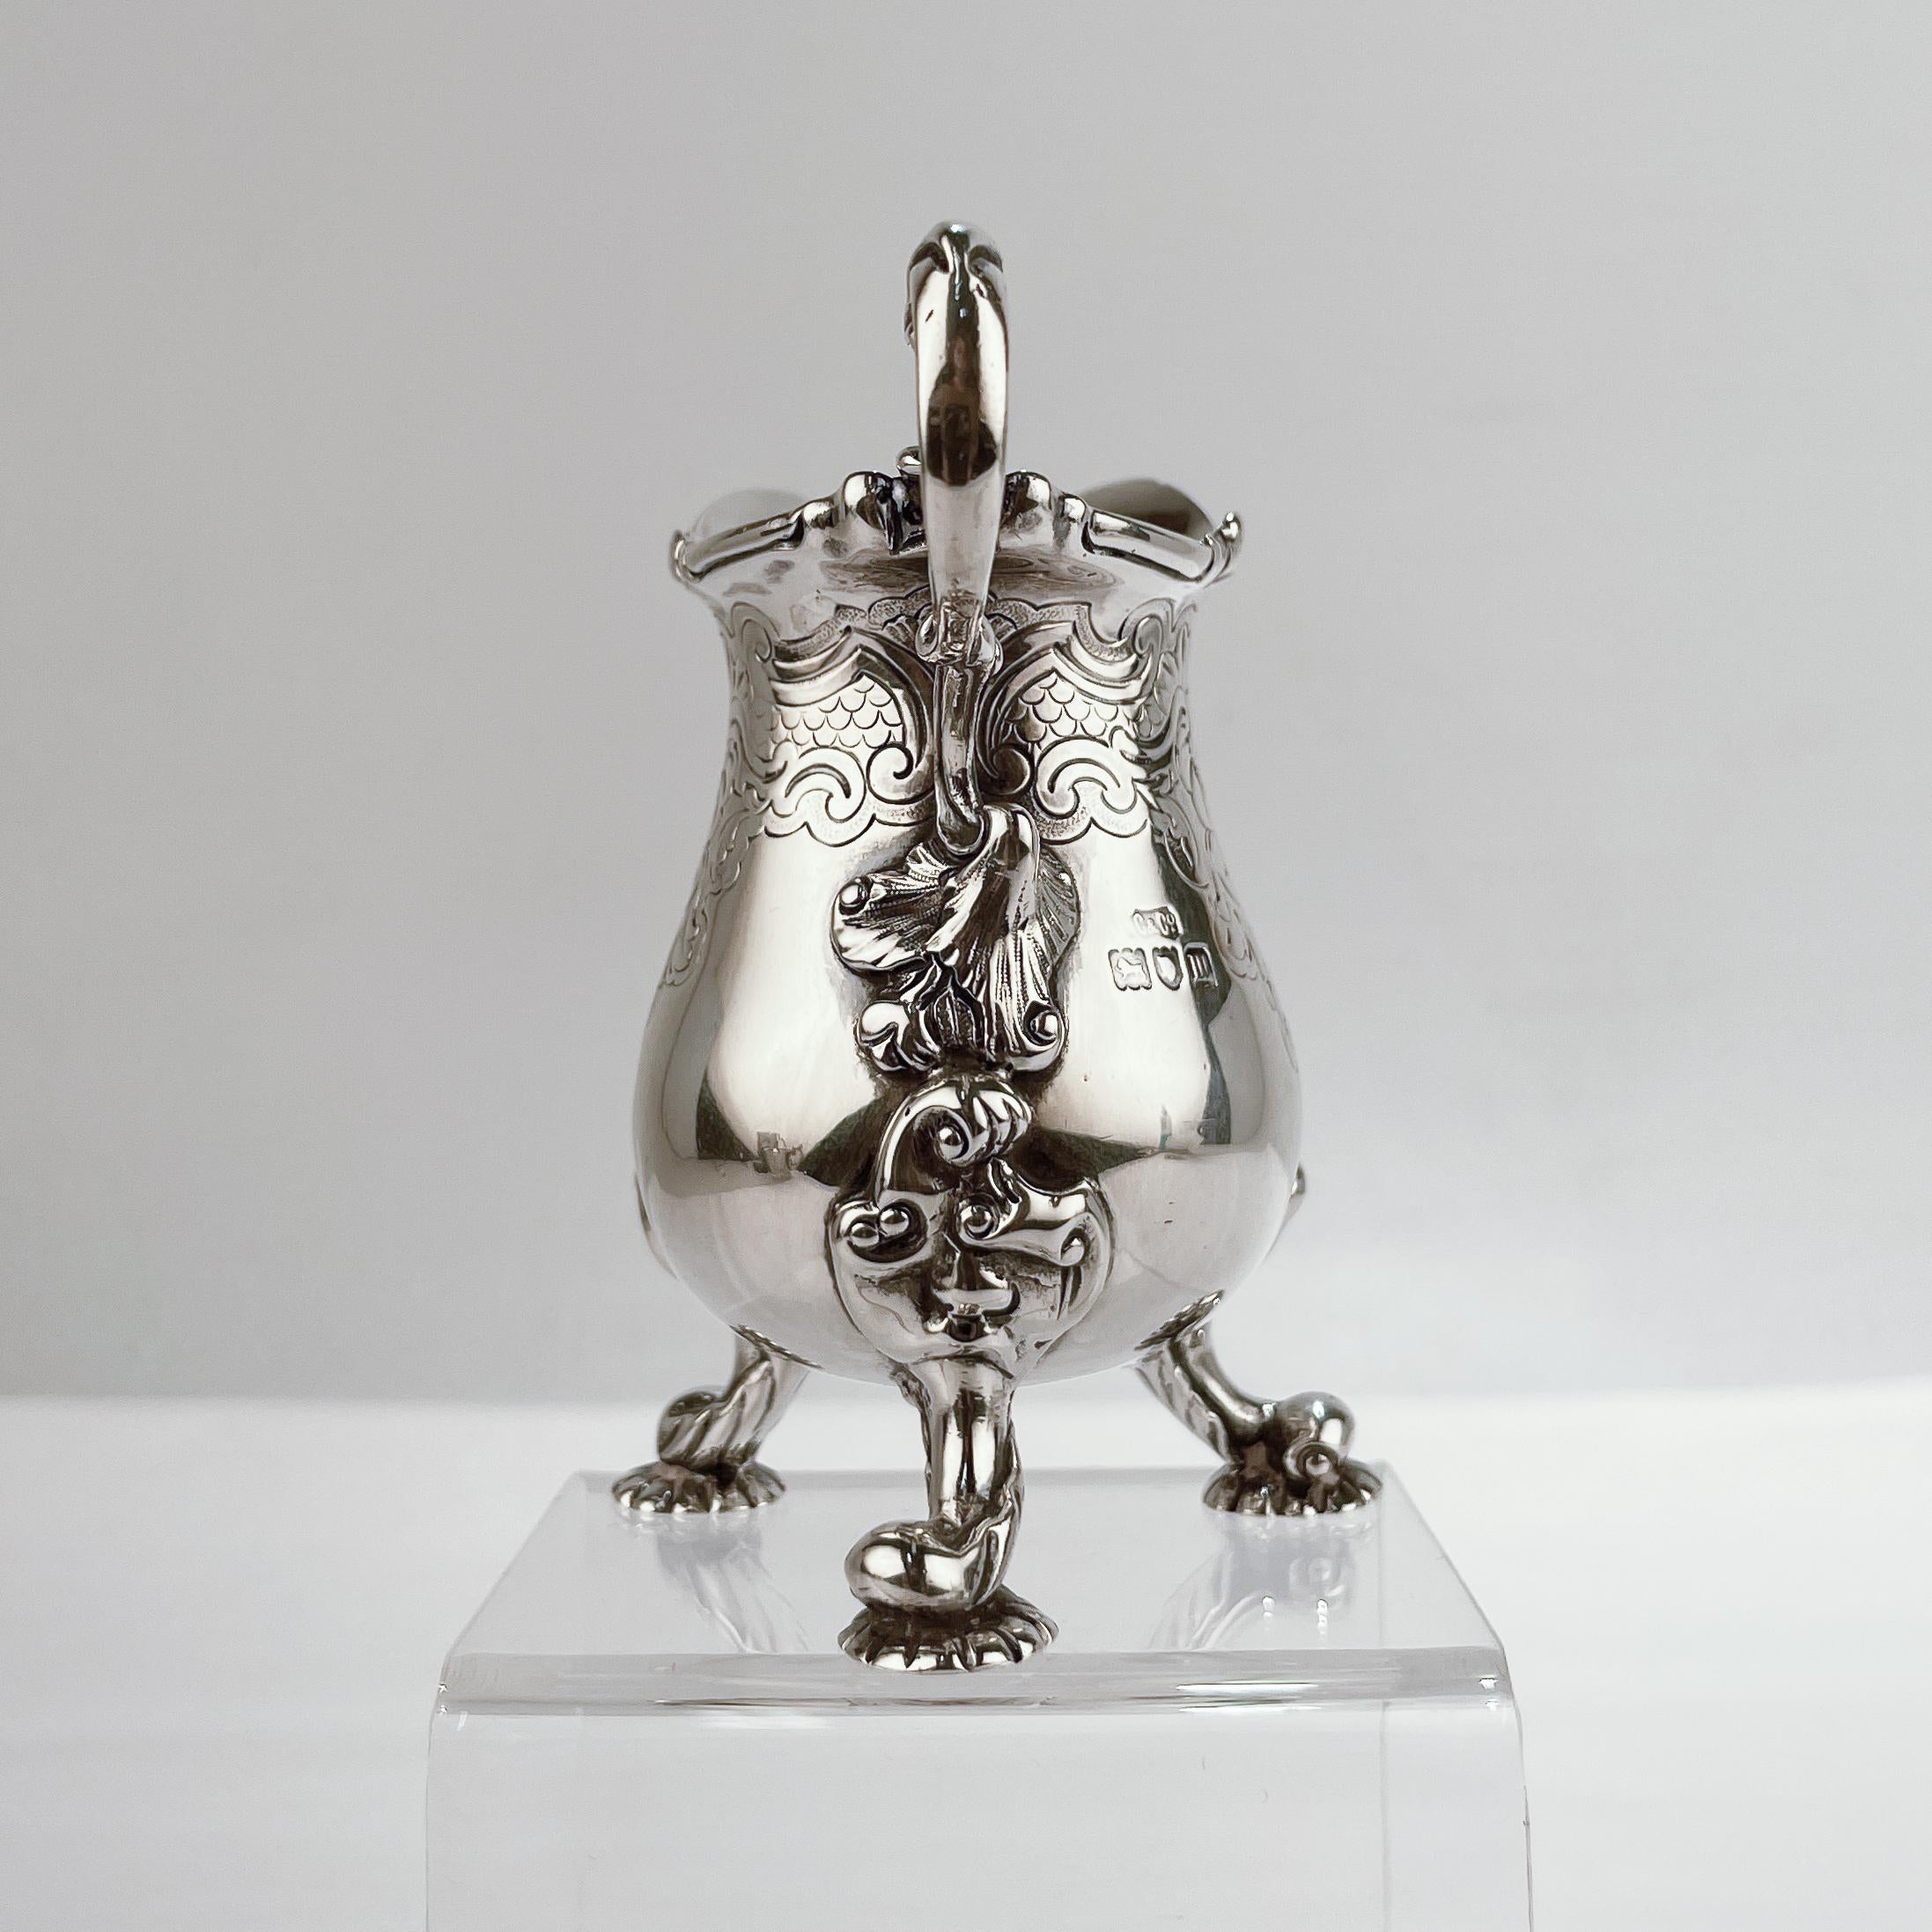 Carrington & Co. Rococo or George II Style Sterling Silver Cream Pitcher In Good Condition For Sale In Philadelphia, PA